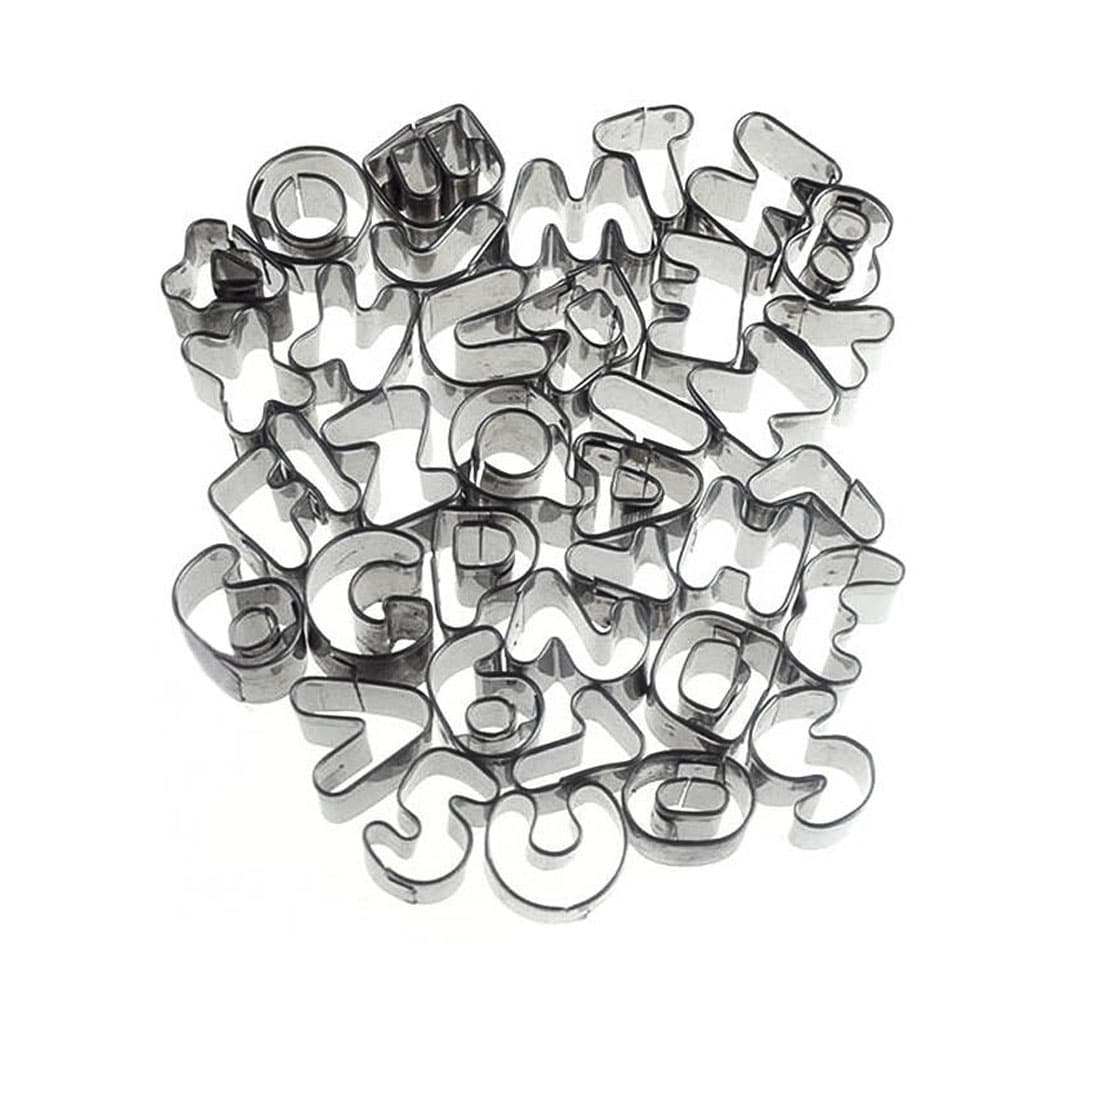 Cookie Alphabet Number Biscuit Cutter Mold Fondant Cutter Mould 37 in1 -  Silver Tone - Bed Bath & Beyond - 36358791